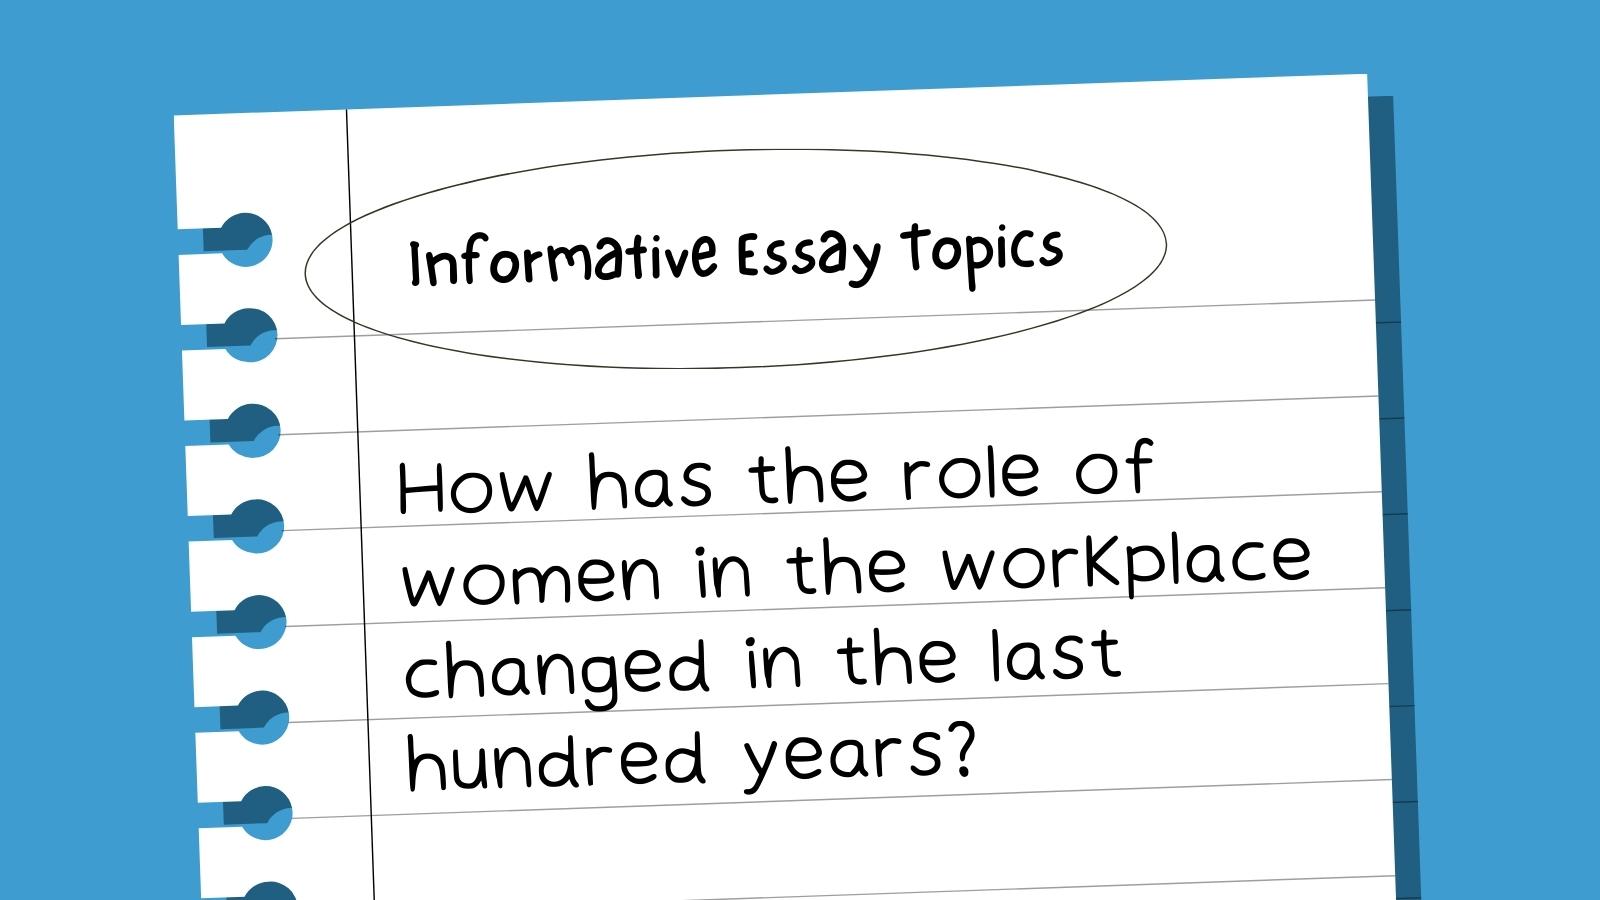 How has the role of women in the workplace changed in the last hundred years?